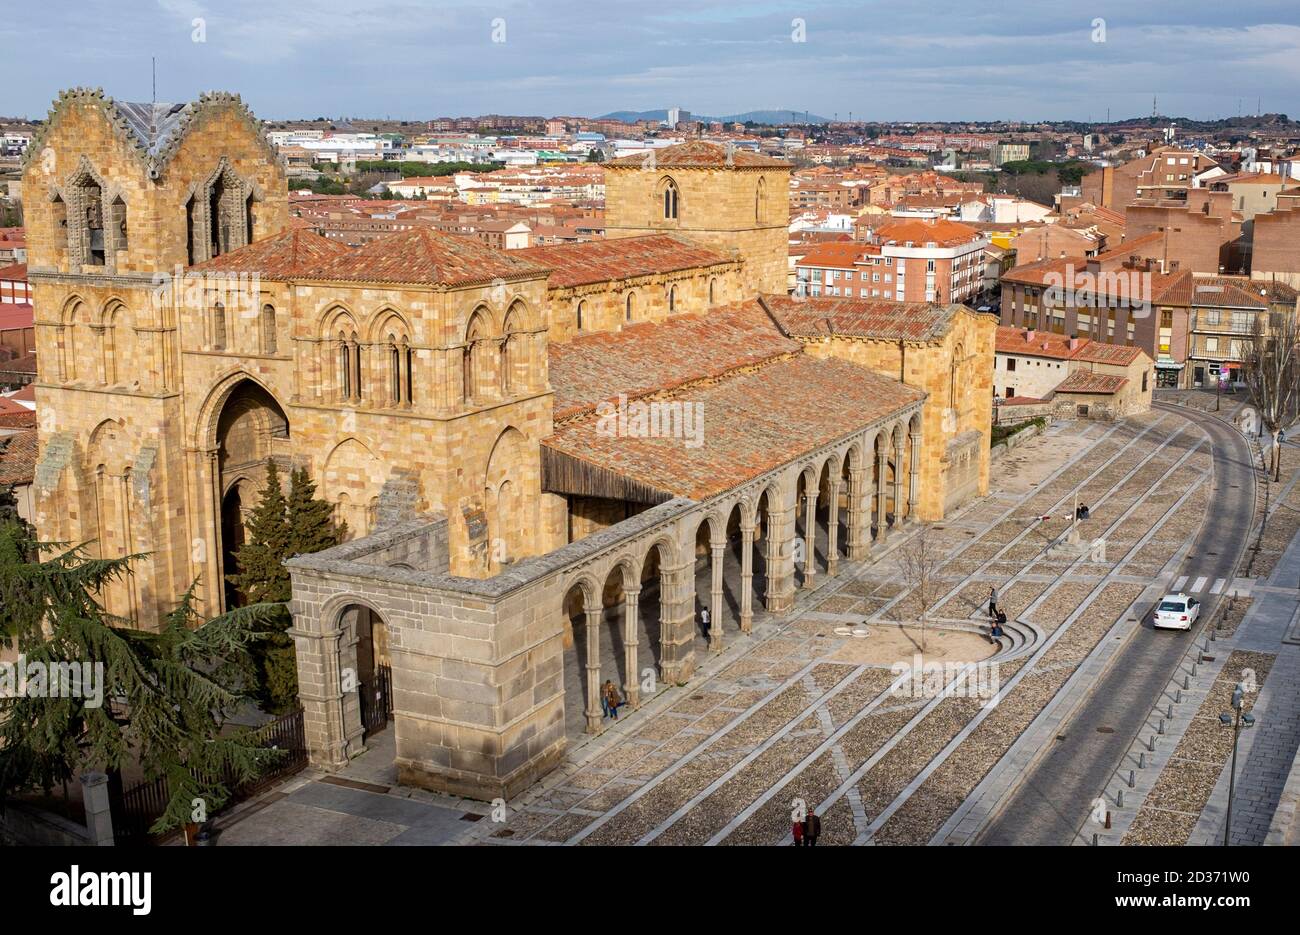 A church of the city of Avila (Spain) sawn from the medeval walls Stock Photo